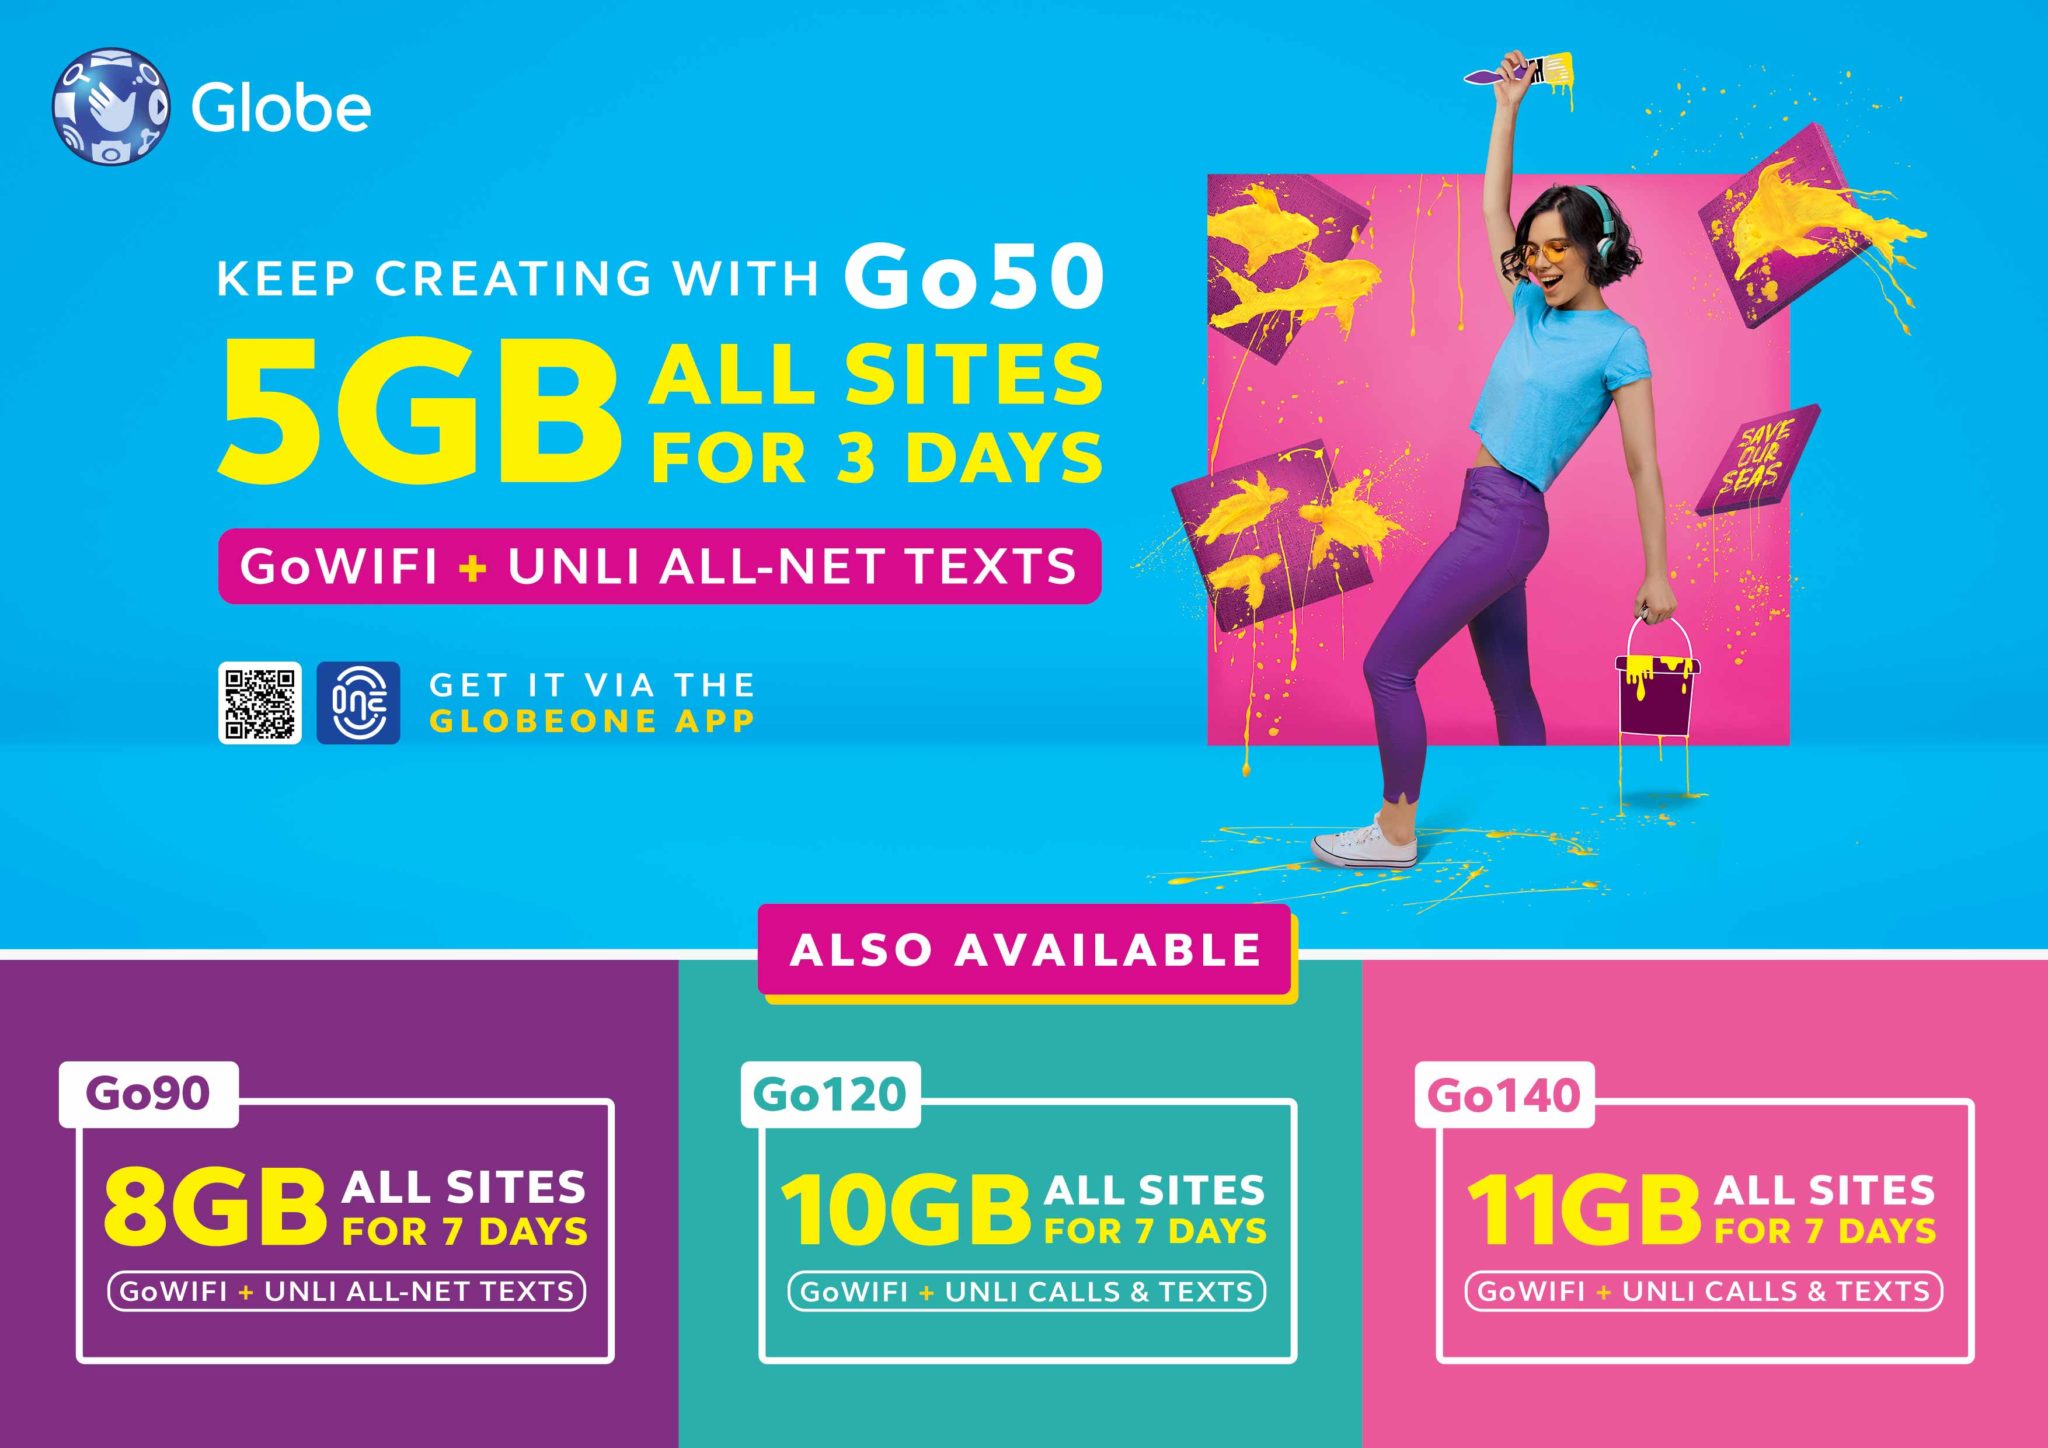 Globe introduces new Go promos for mobile data with unlimited texts